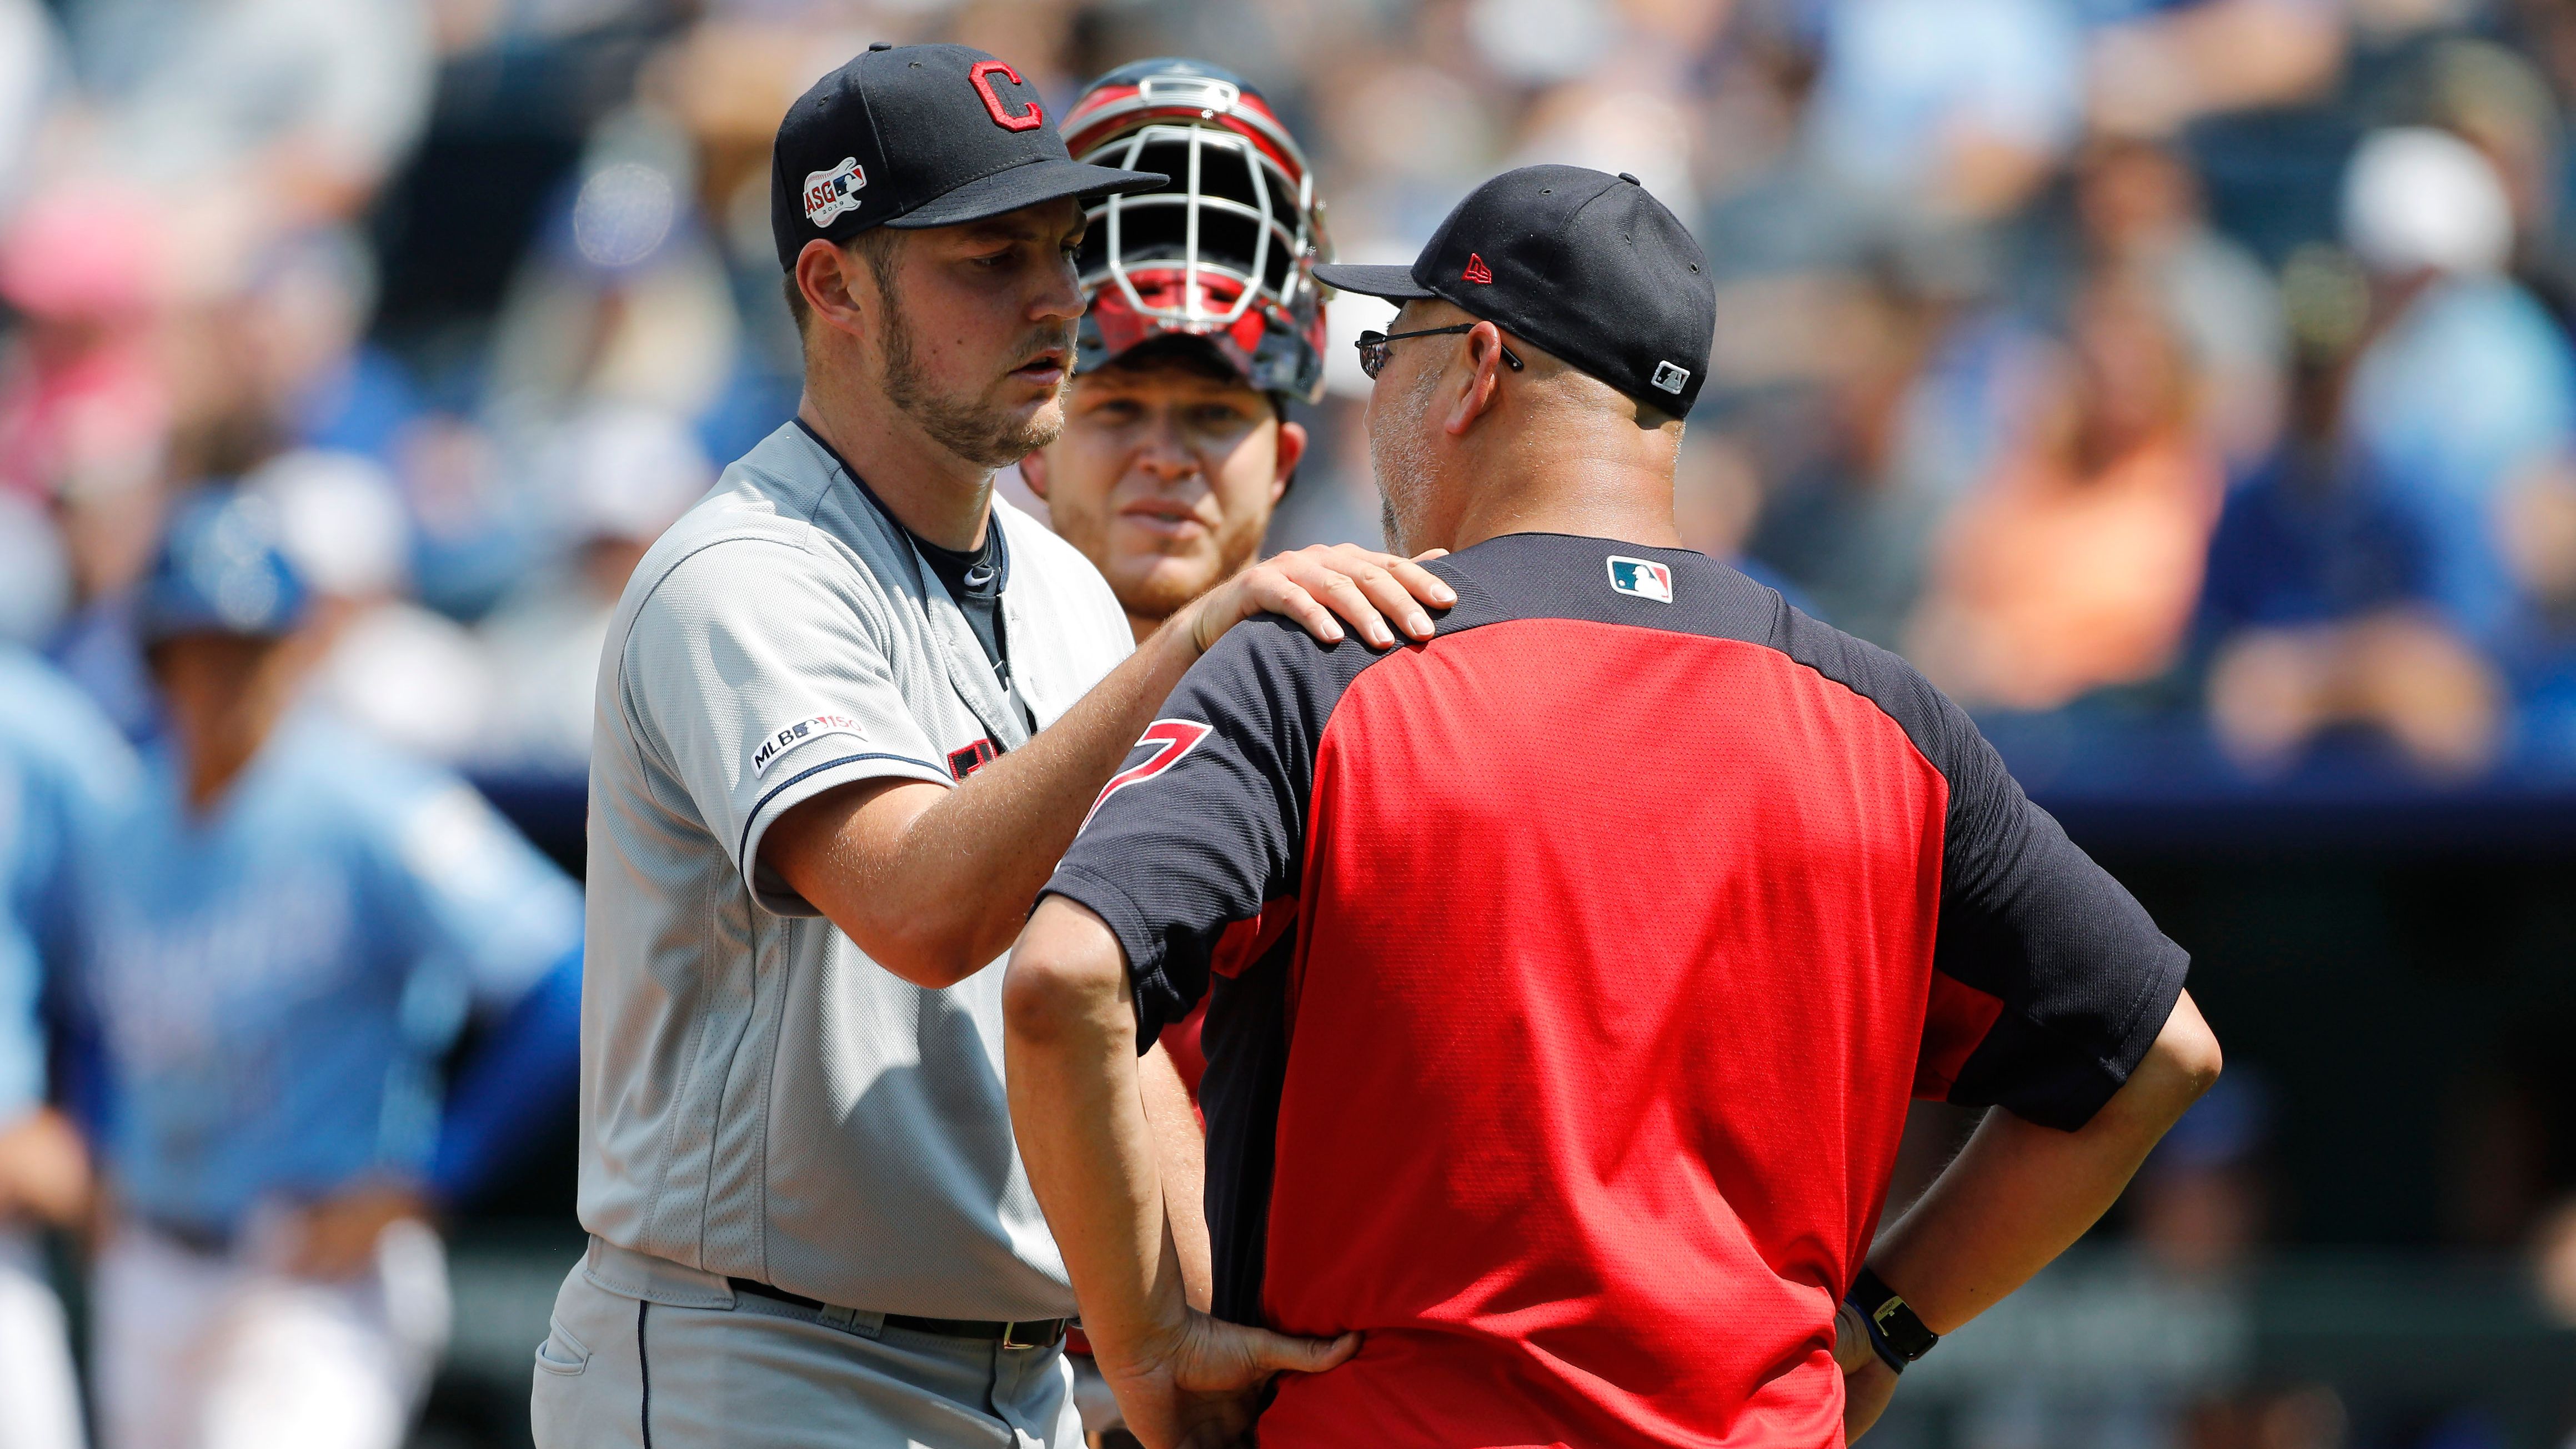 Indians Trevor Bauer Launches Ball to Center Field, Immediately Apologizes